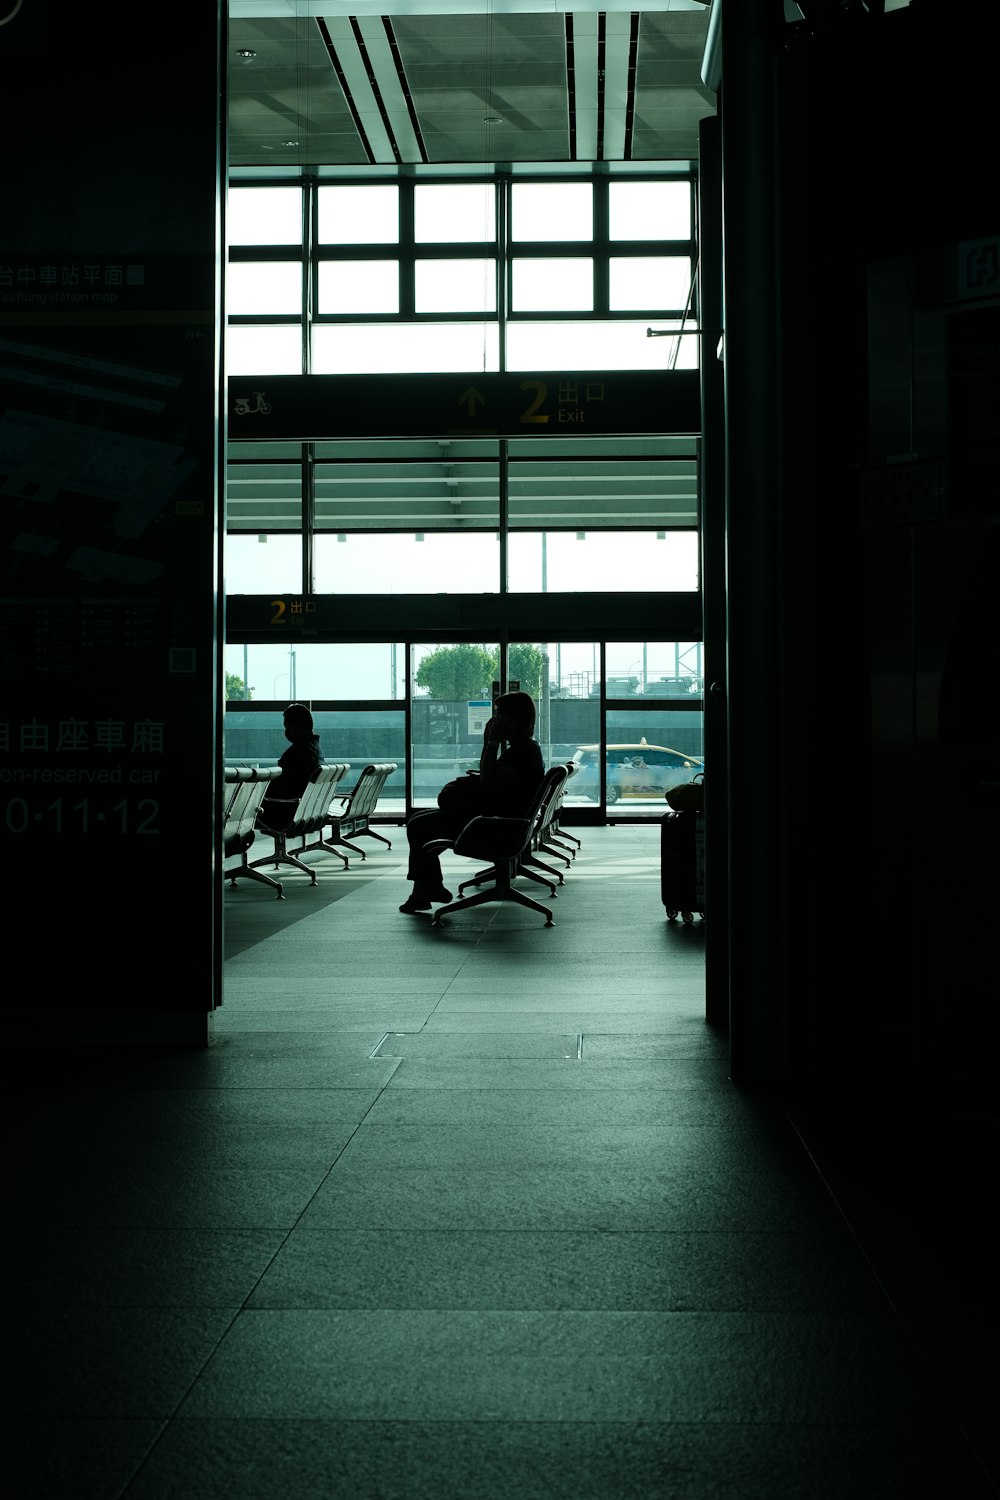 a person sitting in a chair at an airport